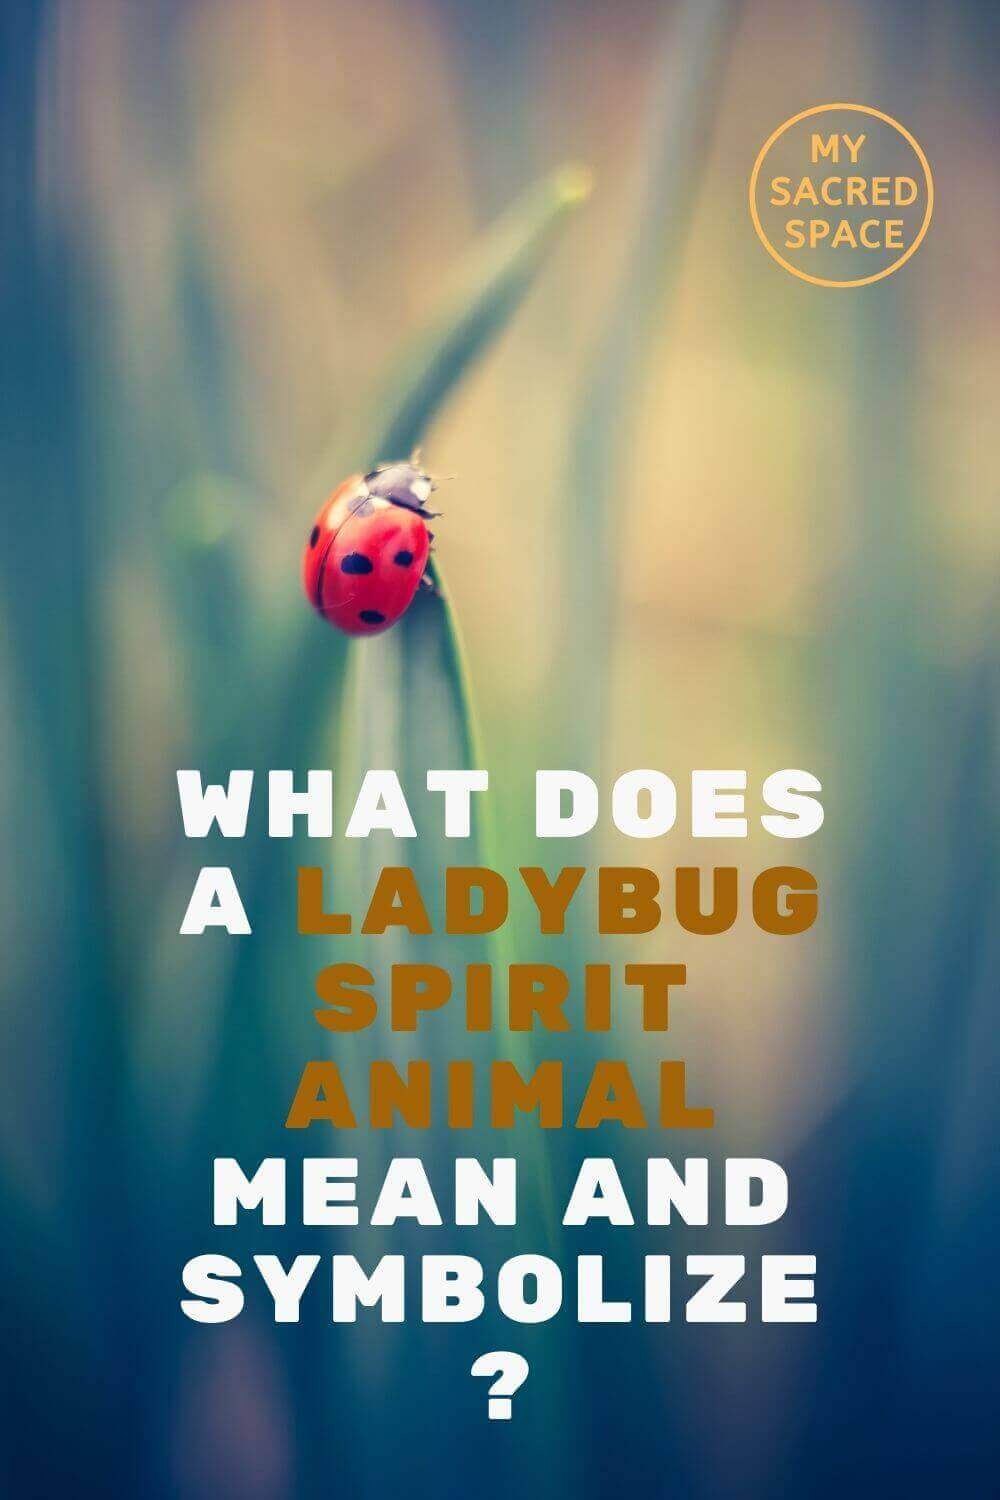 what does a ladybug spirit animal mean and symbolize